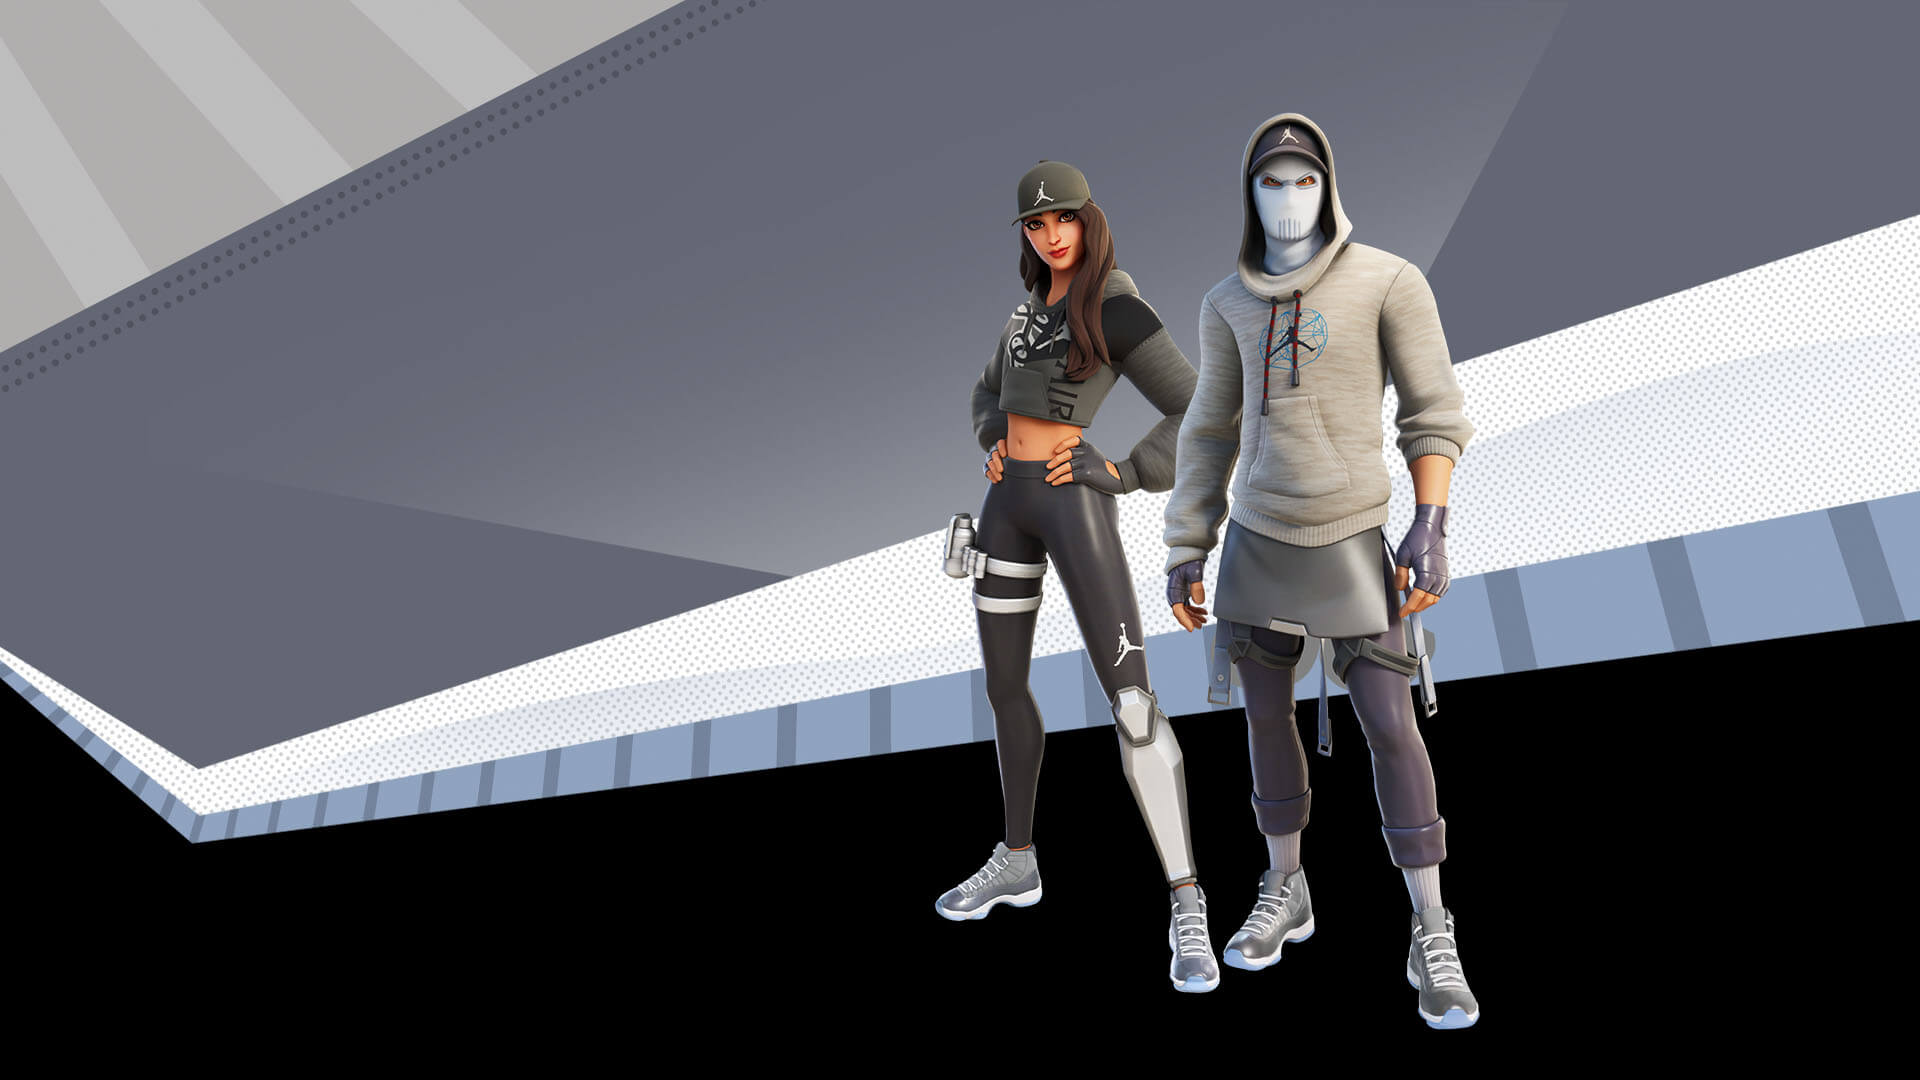 The Jumpman Zone and the Air Jordan XI 'Cool Grey' come to Fortnite